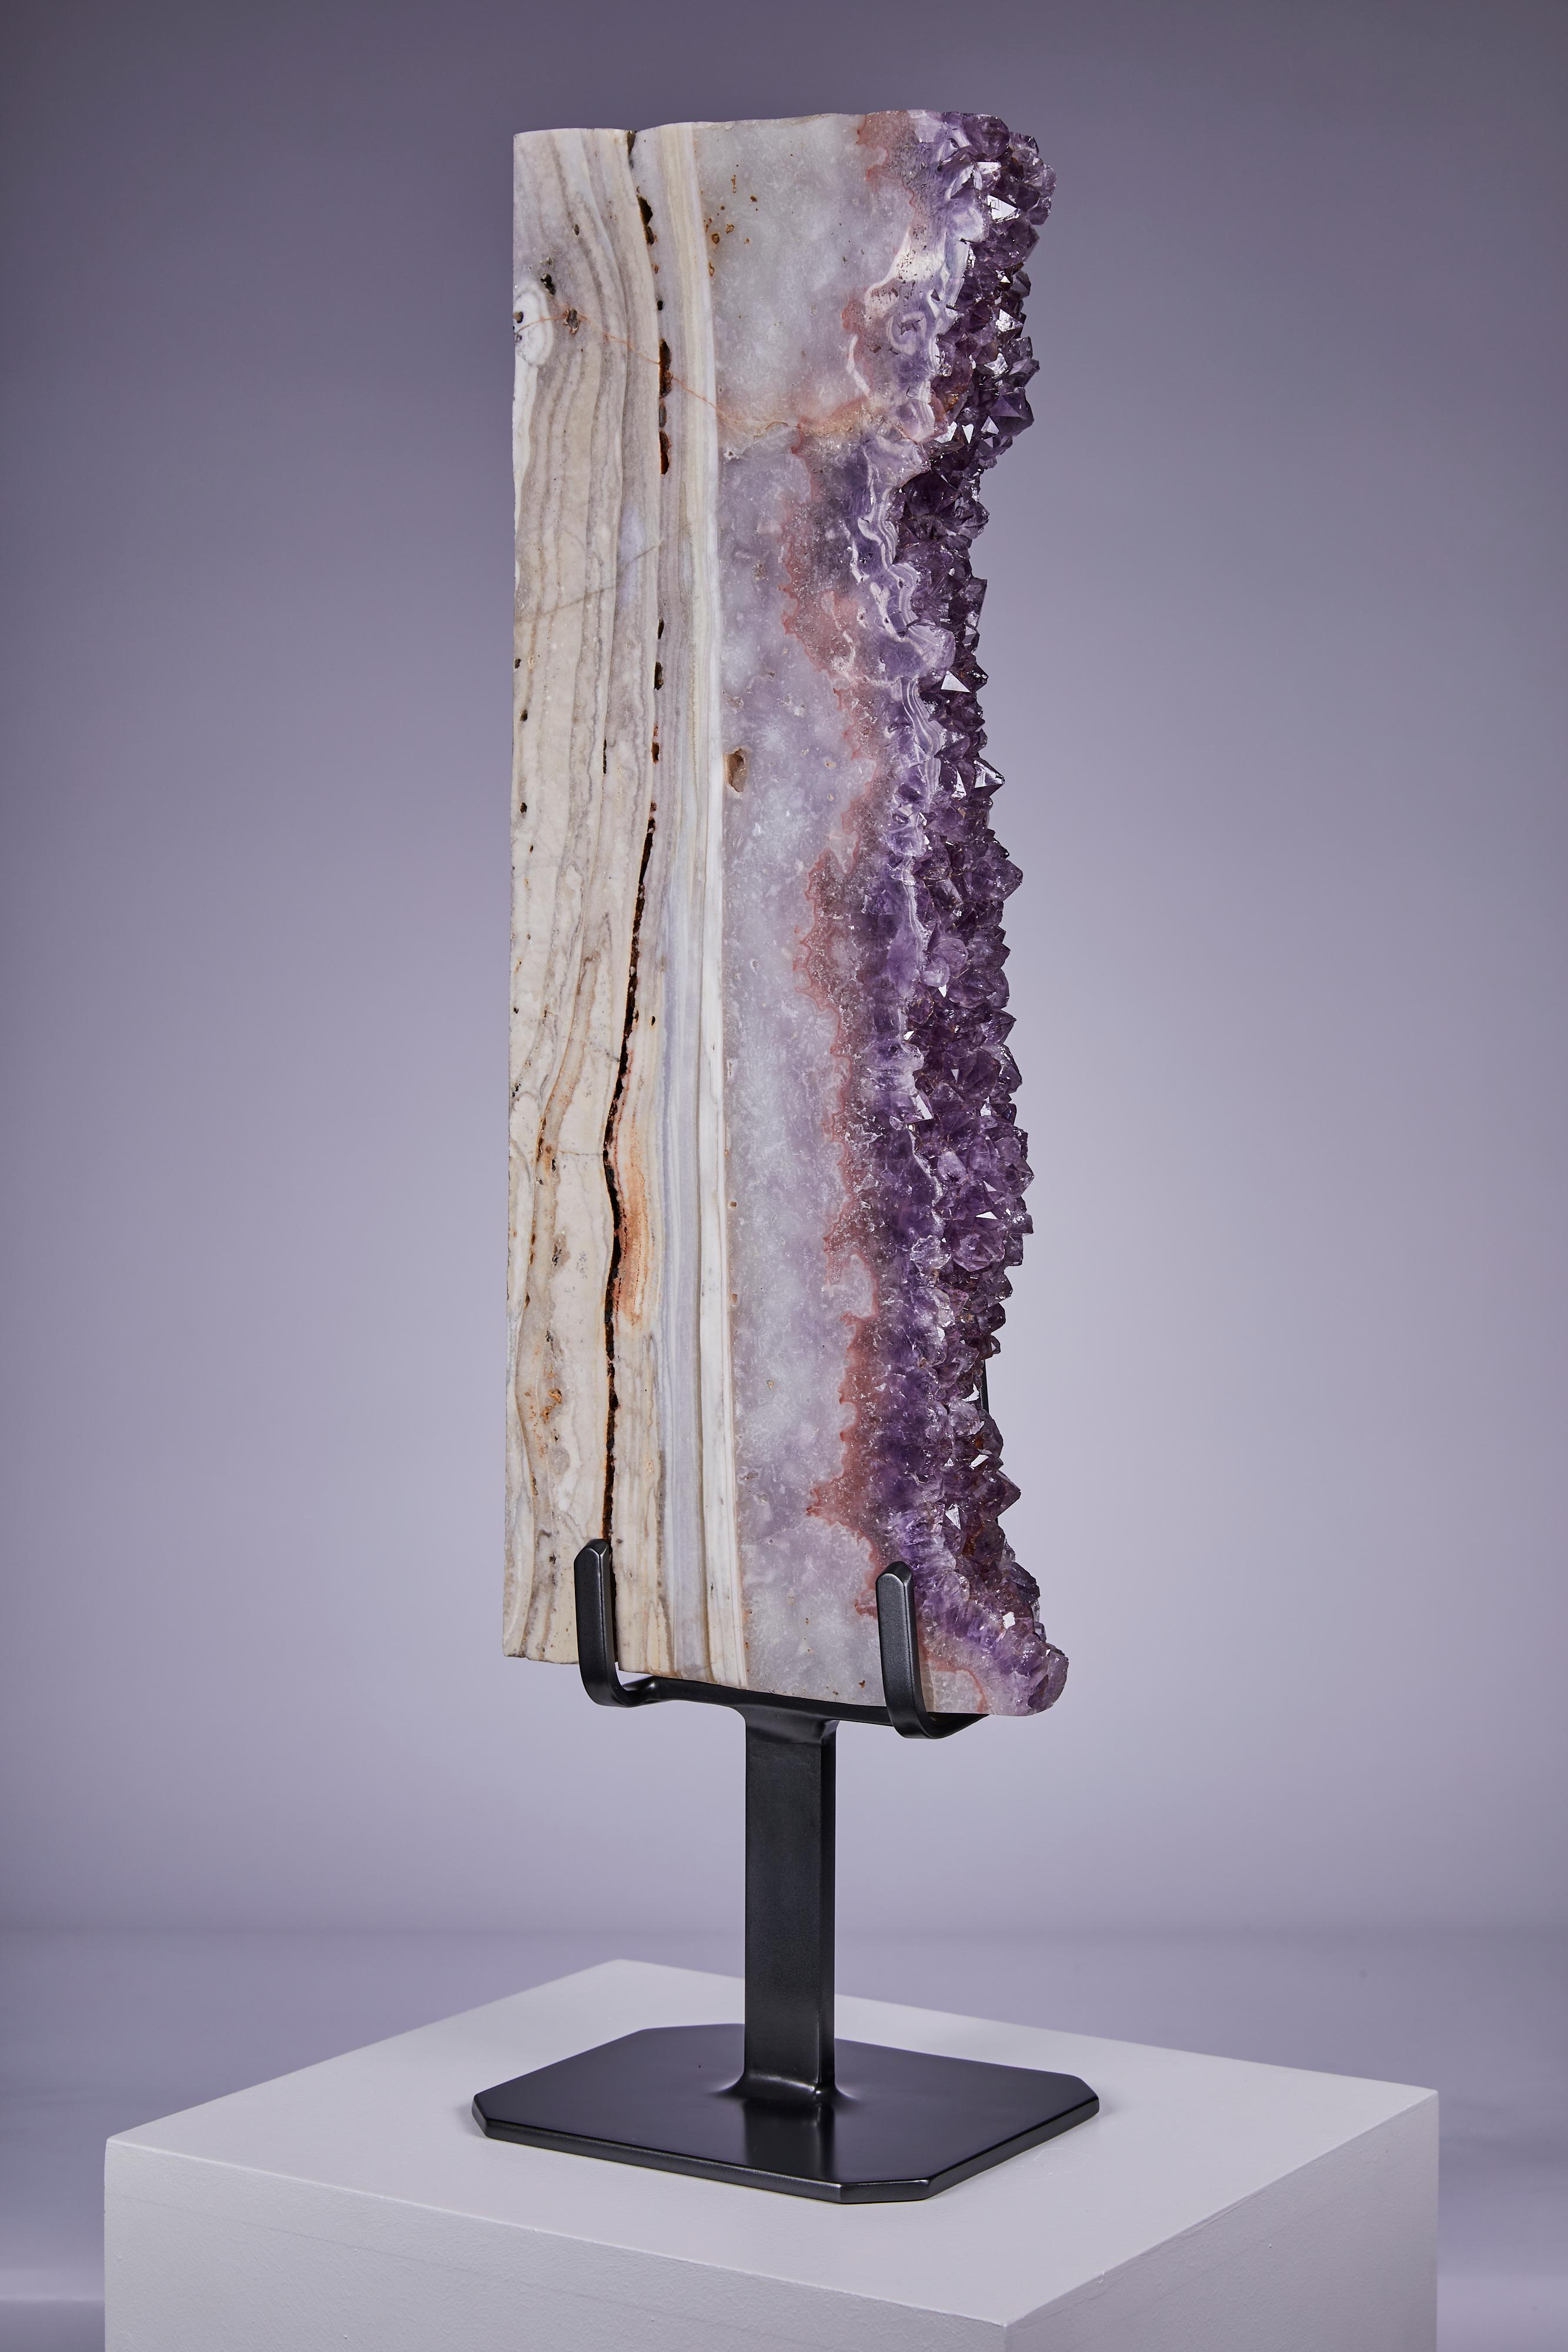 Agate Large columnar agate and amethyst formation For Sale